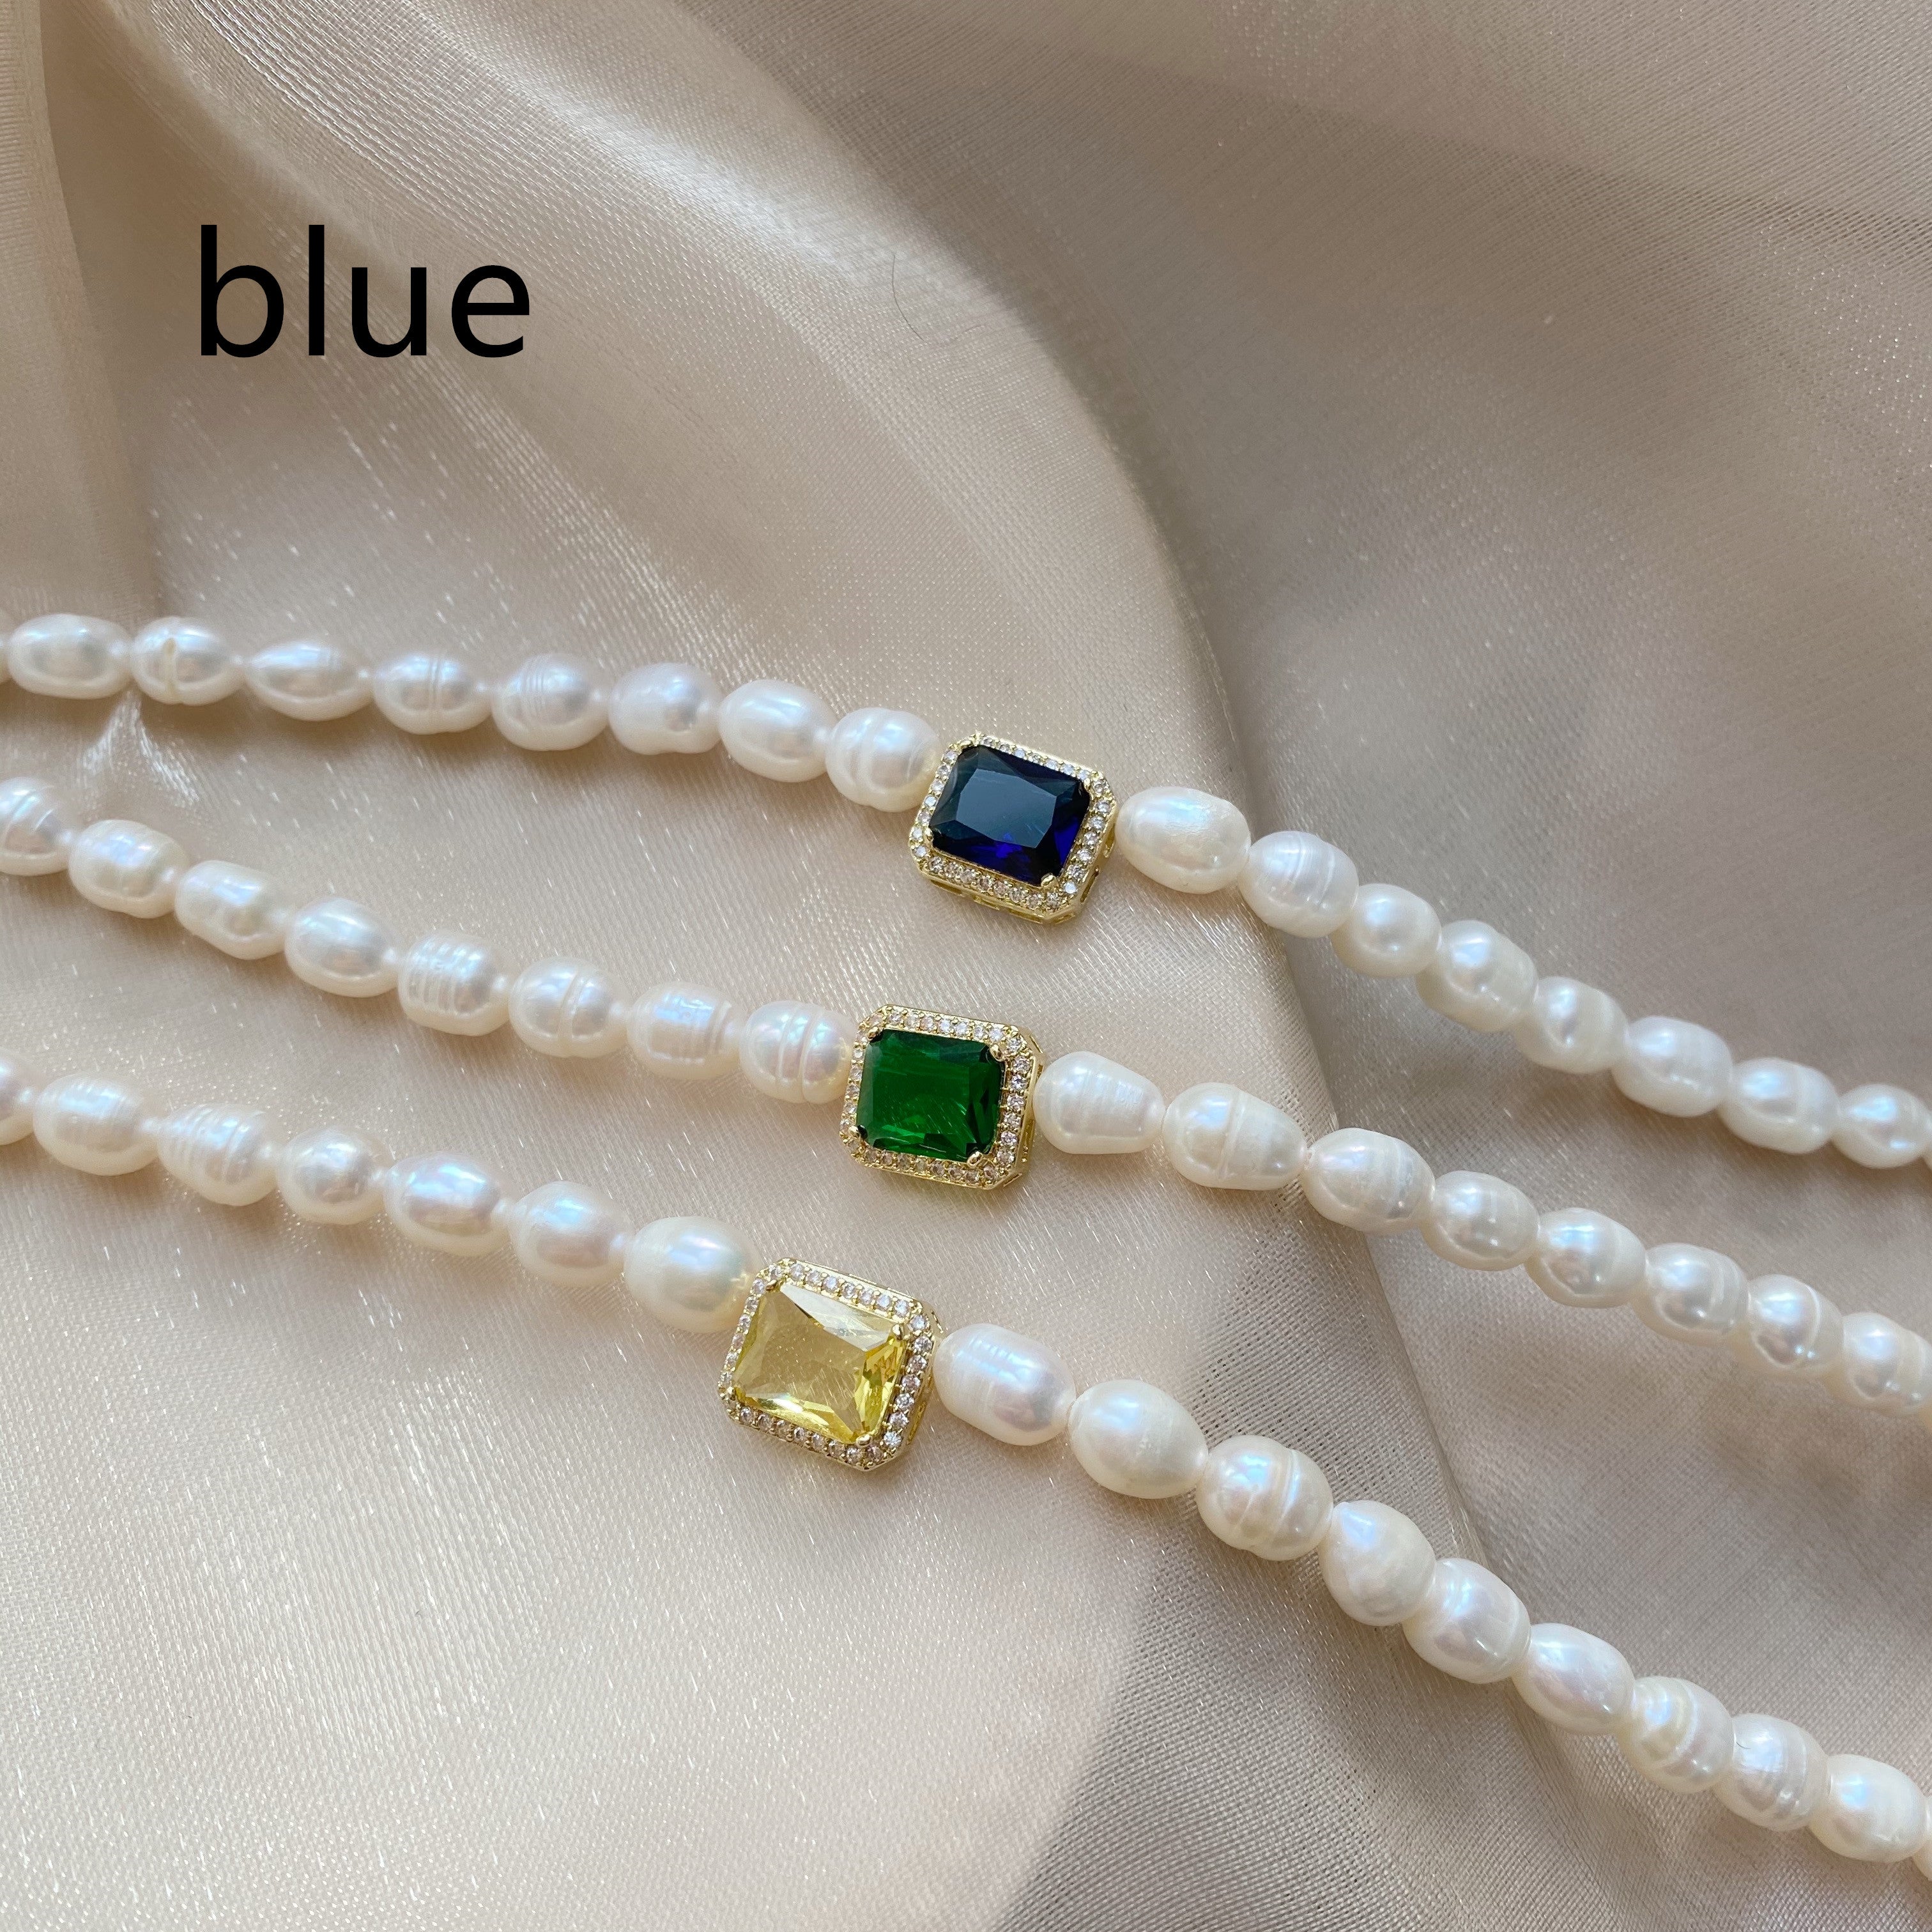 Female pearl gem necklace